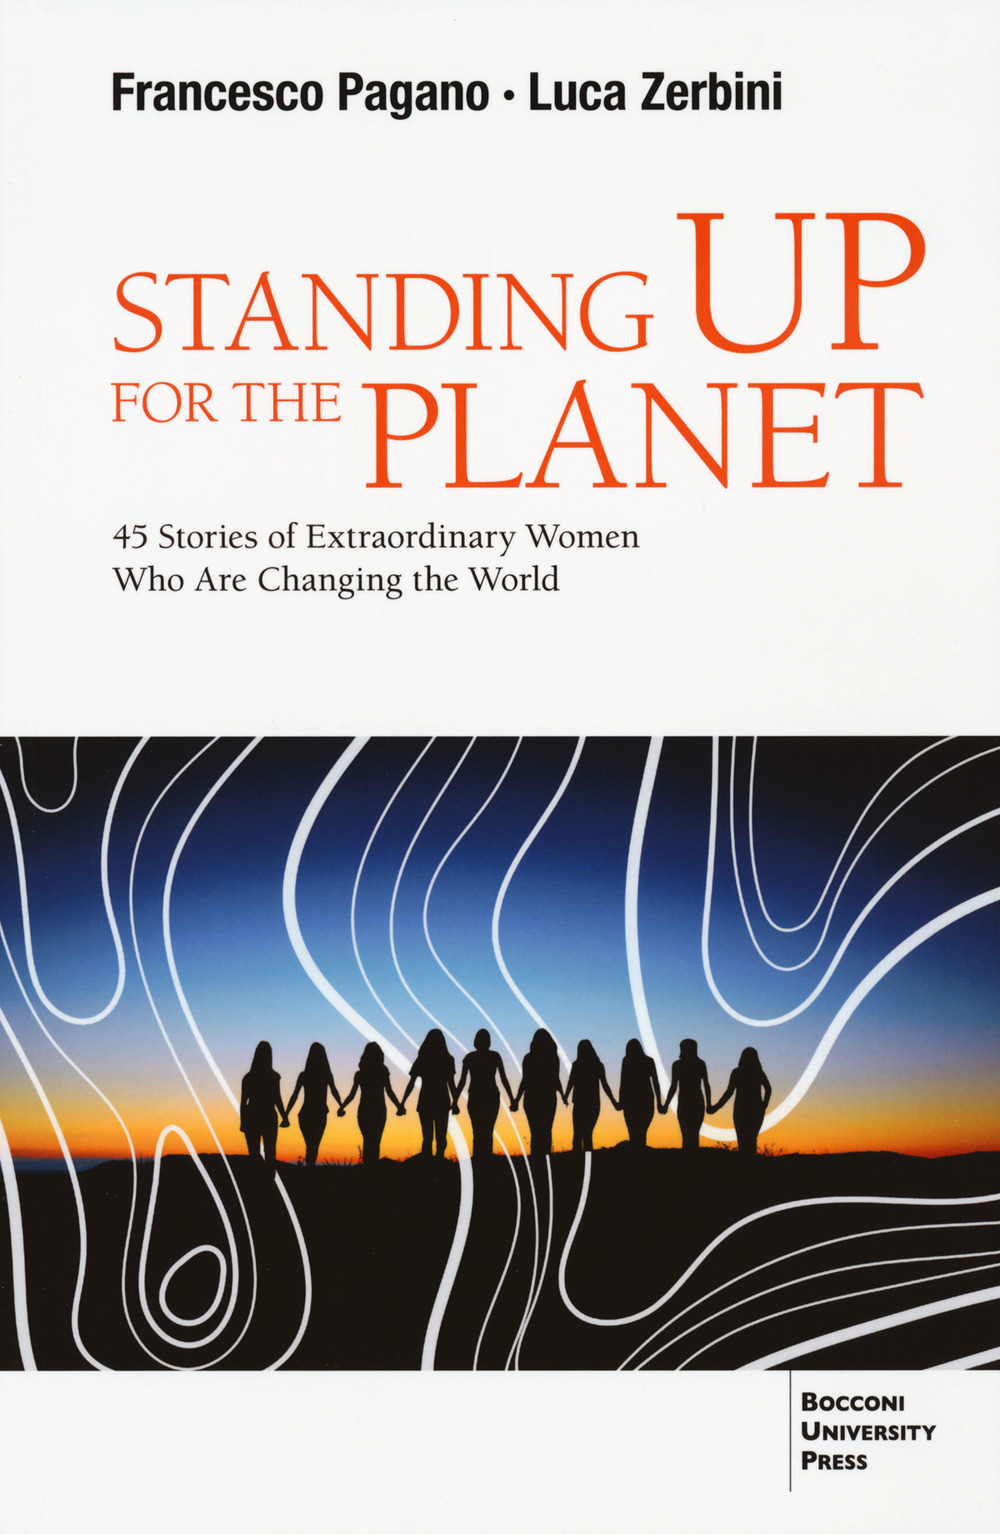 Standing up for the planet. 45 stories of extraordinary women who are changing the world